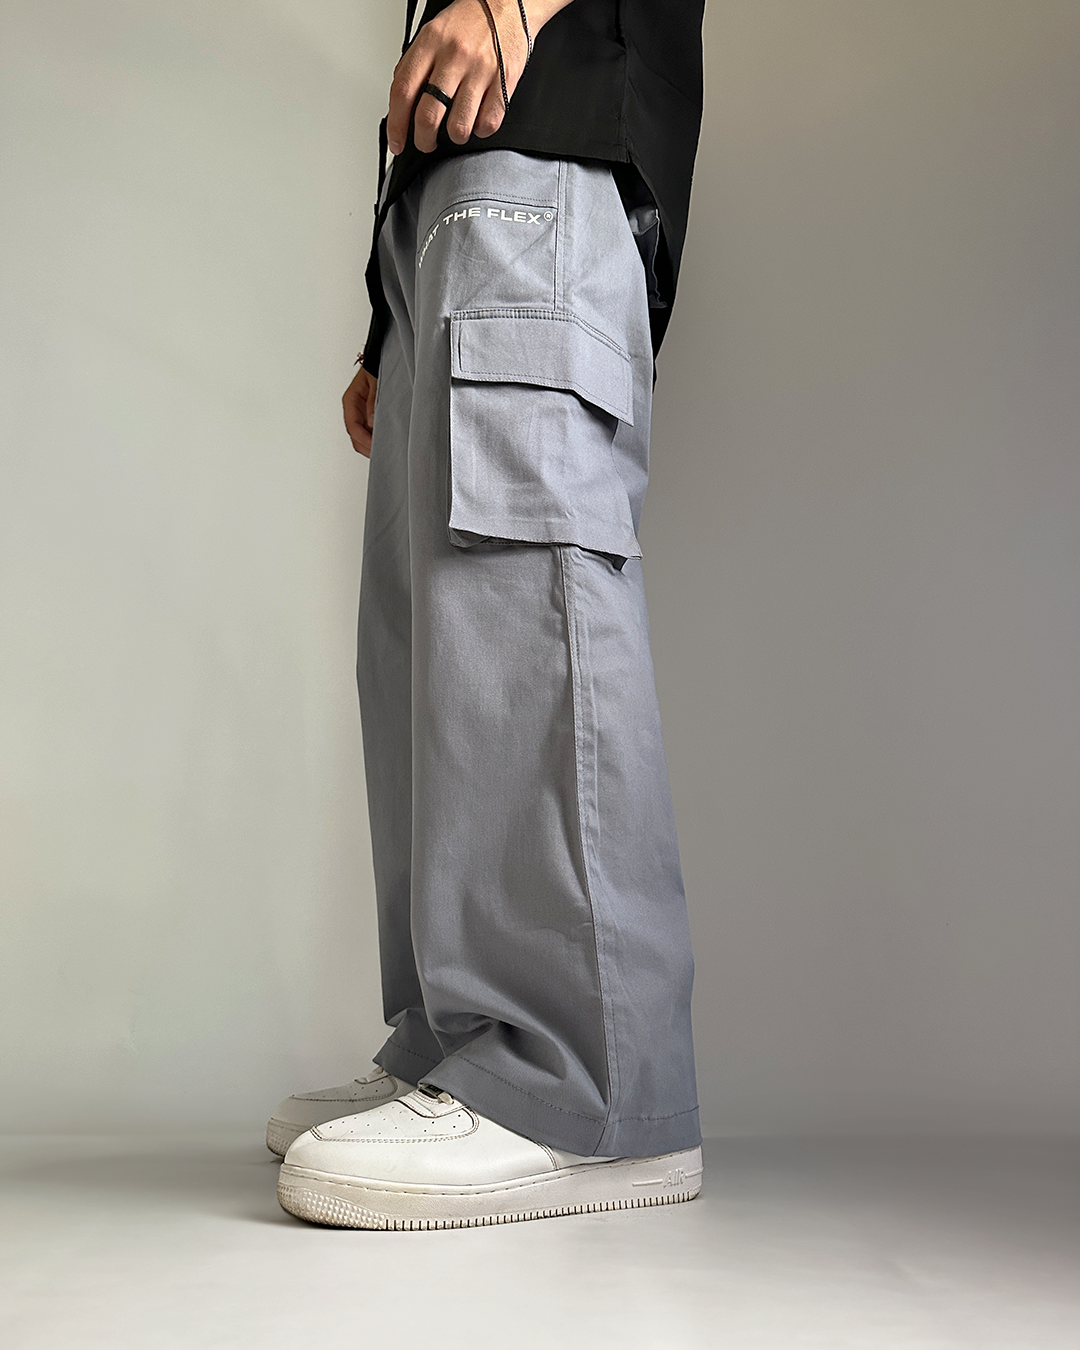 The Souled Store Original Solids: Light Grey Men Cargo Jeans : Amazon.in:  Fashion